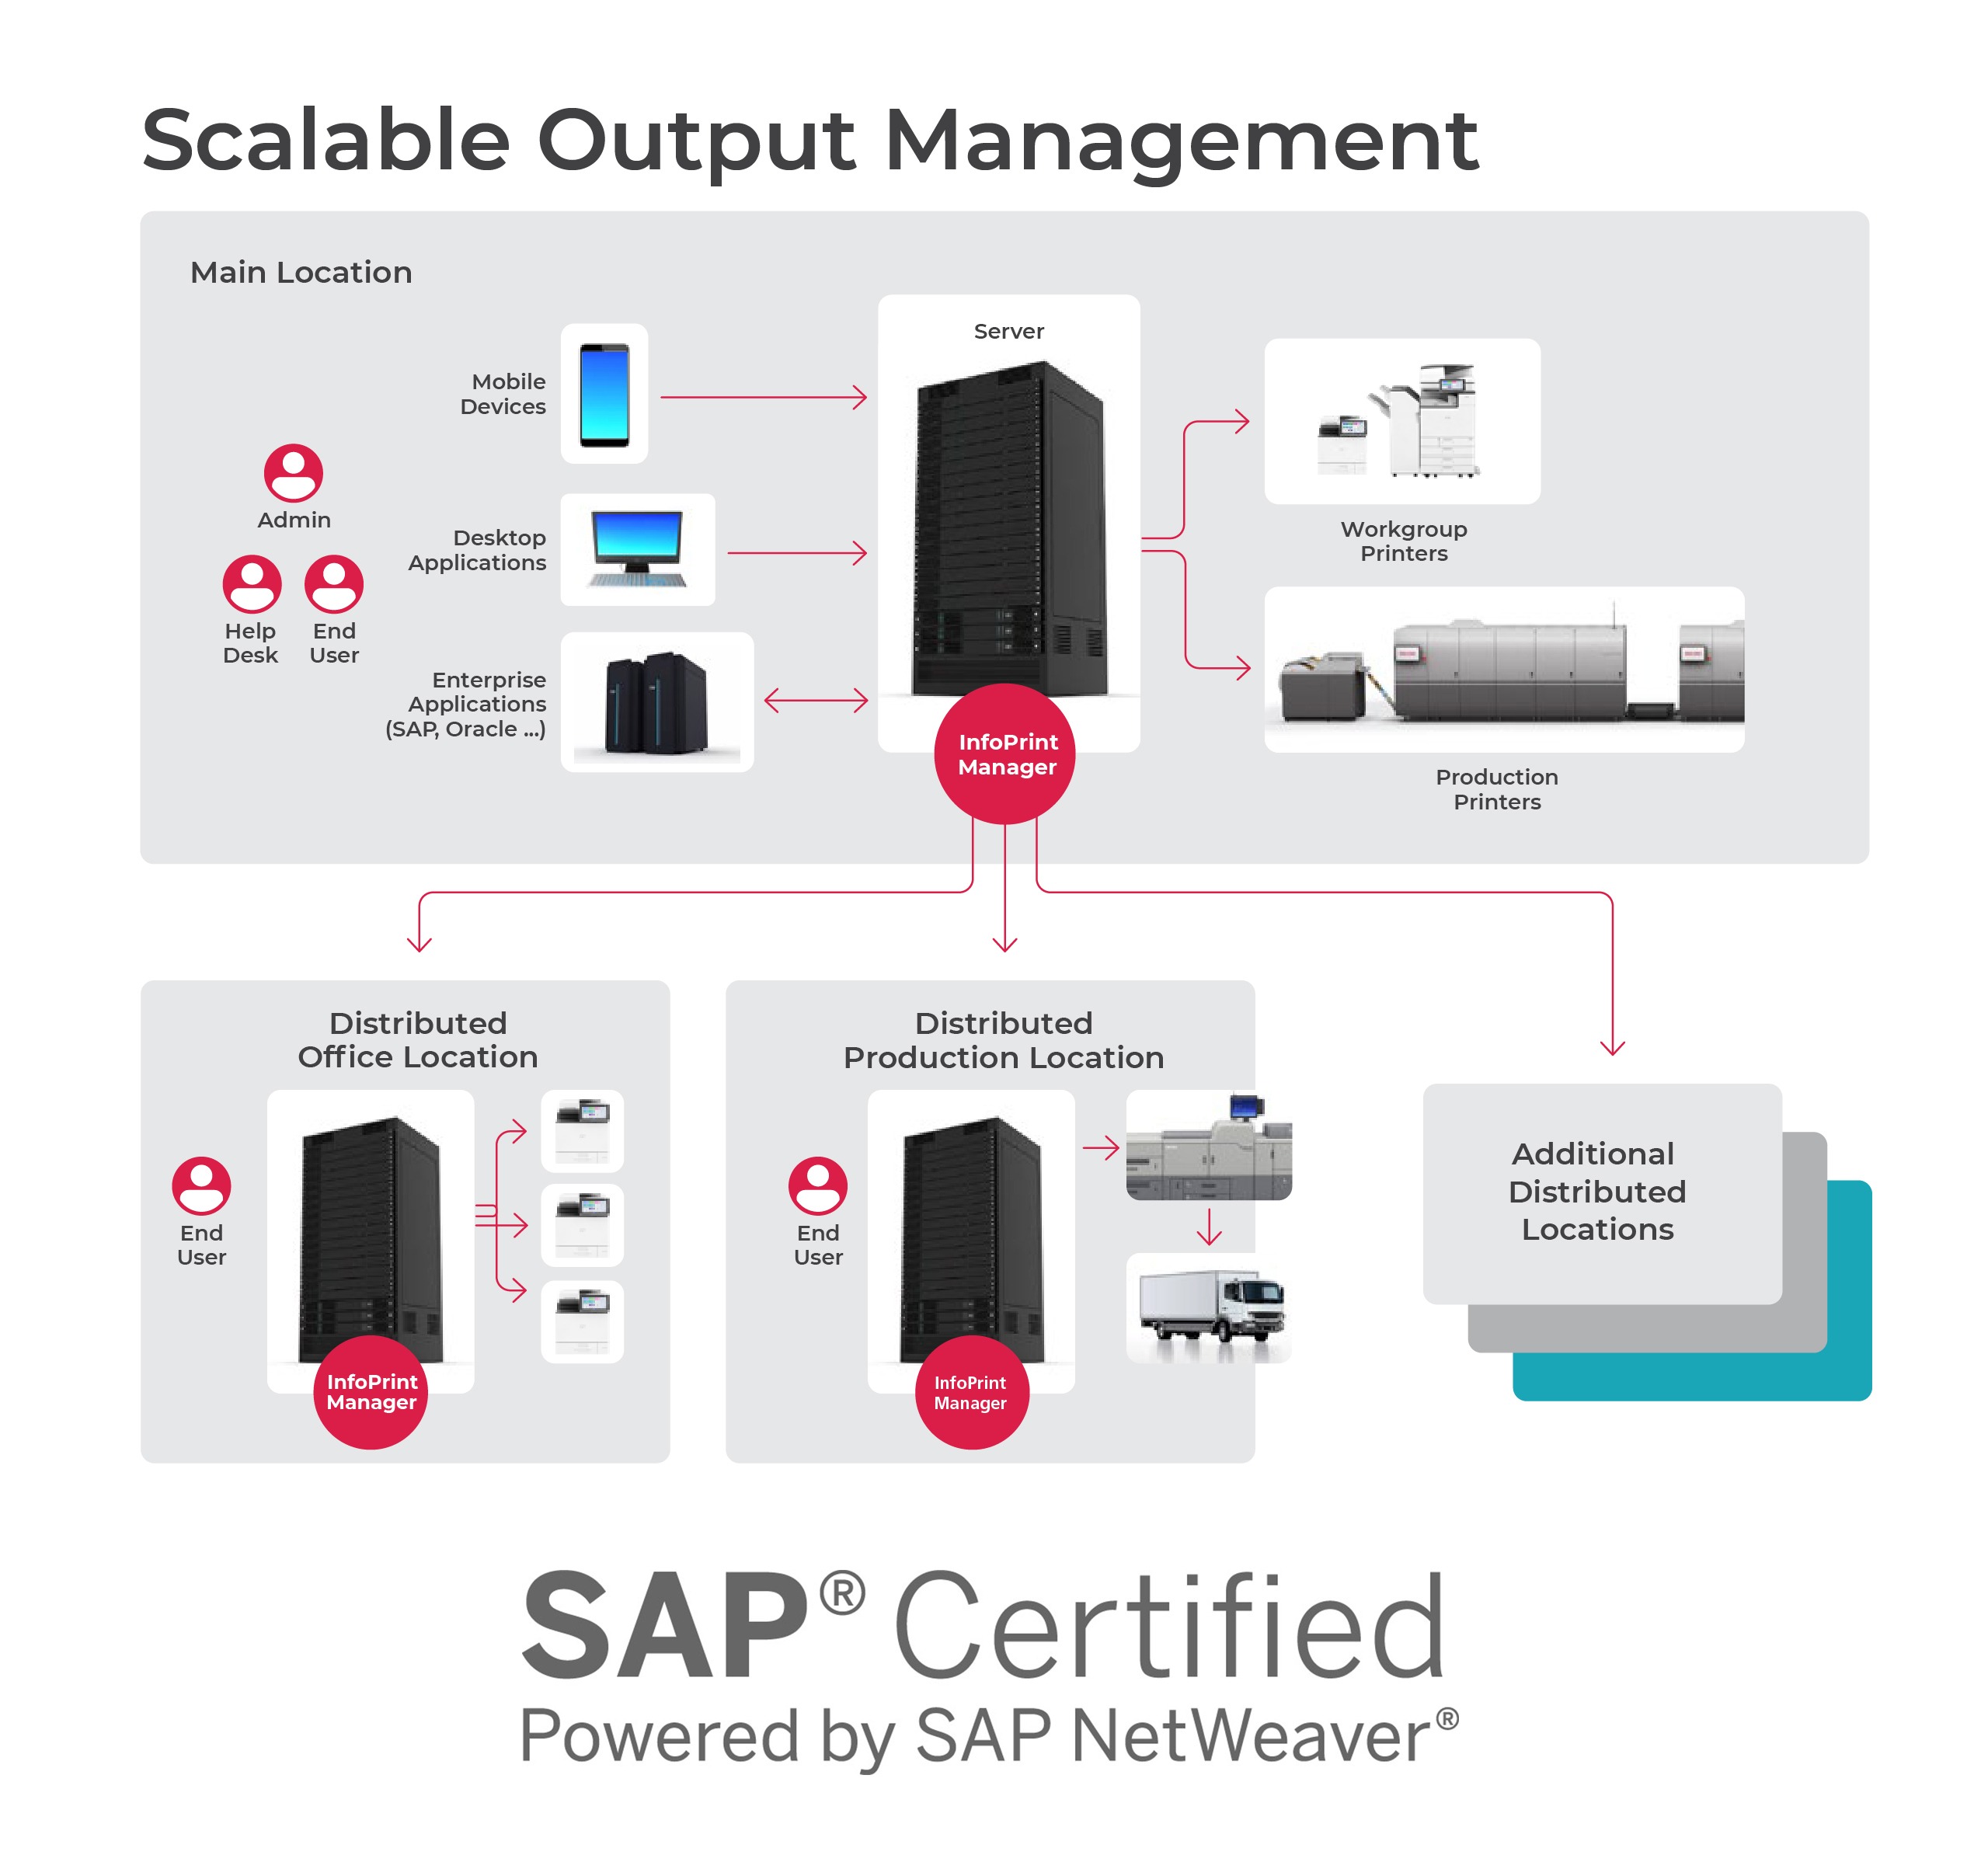 A chart showing the flow of Scalable output management using Infoprint Manager that is SAP Certified